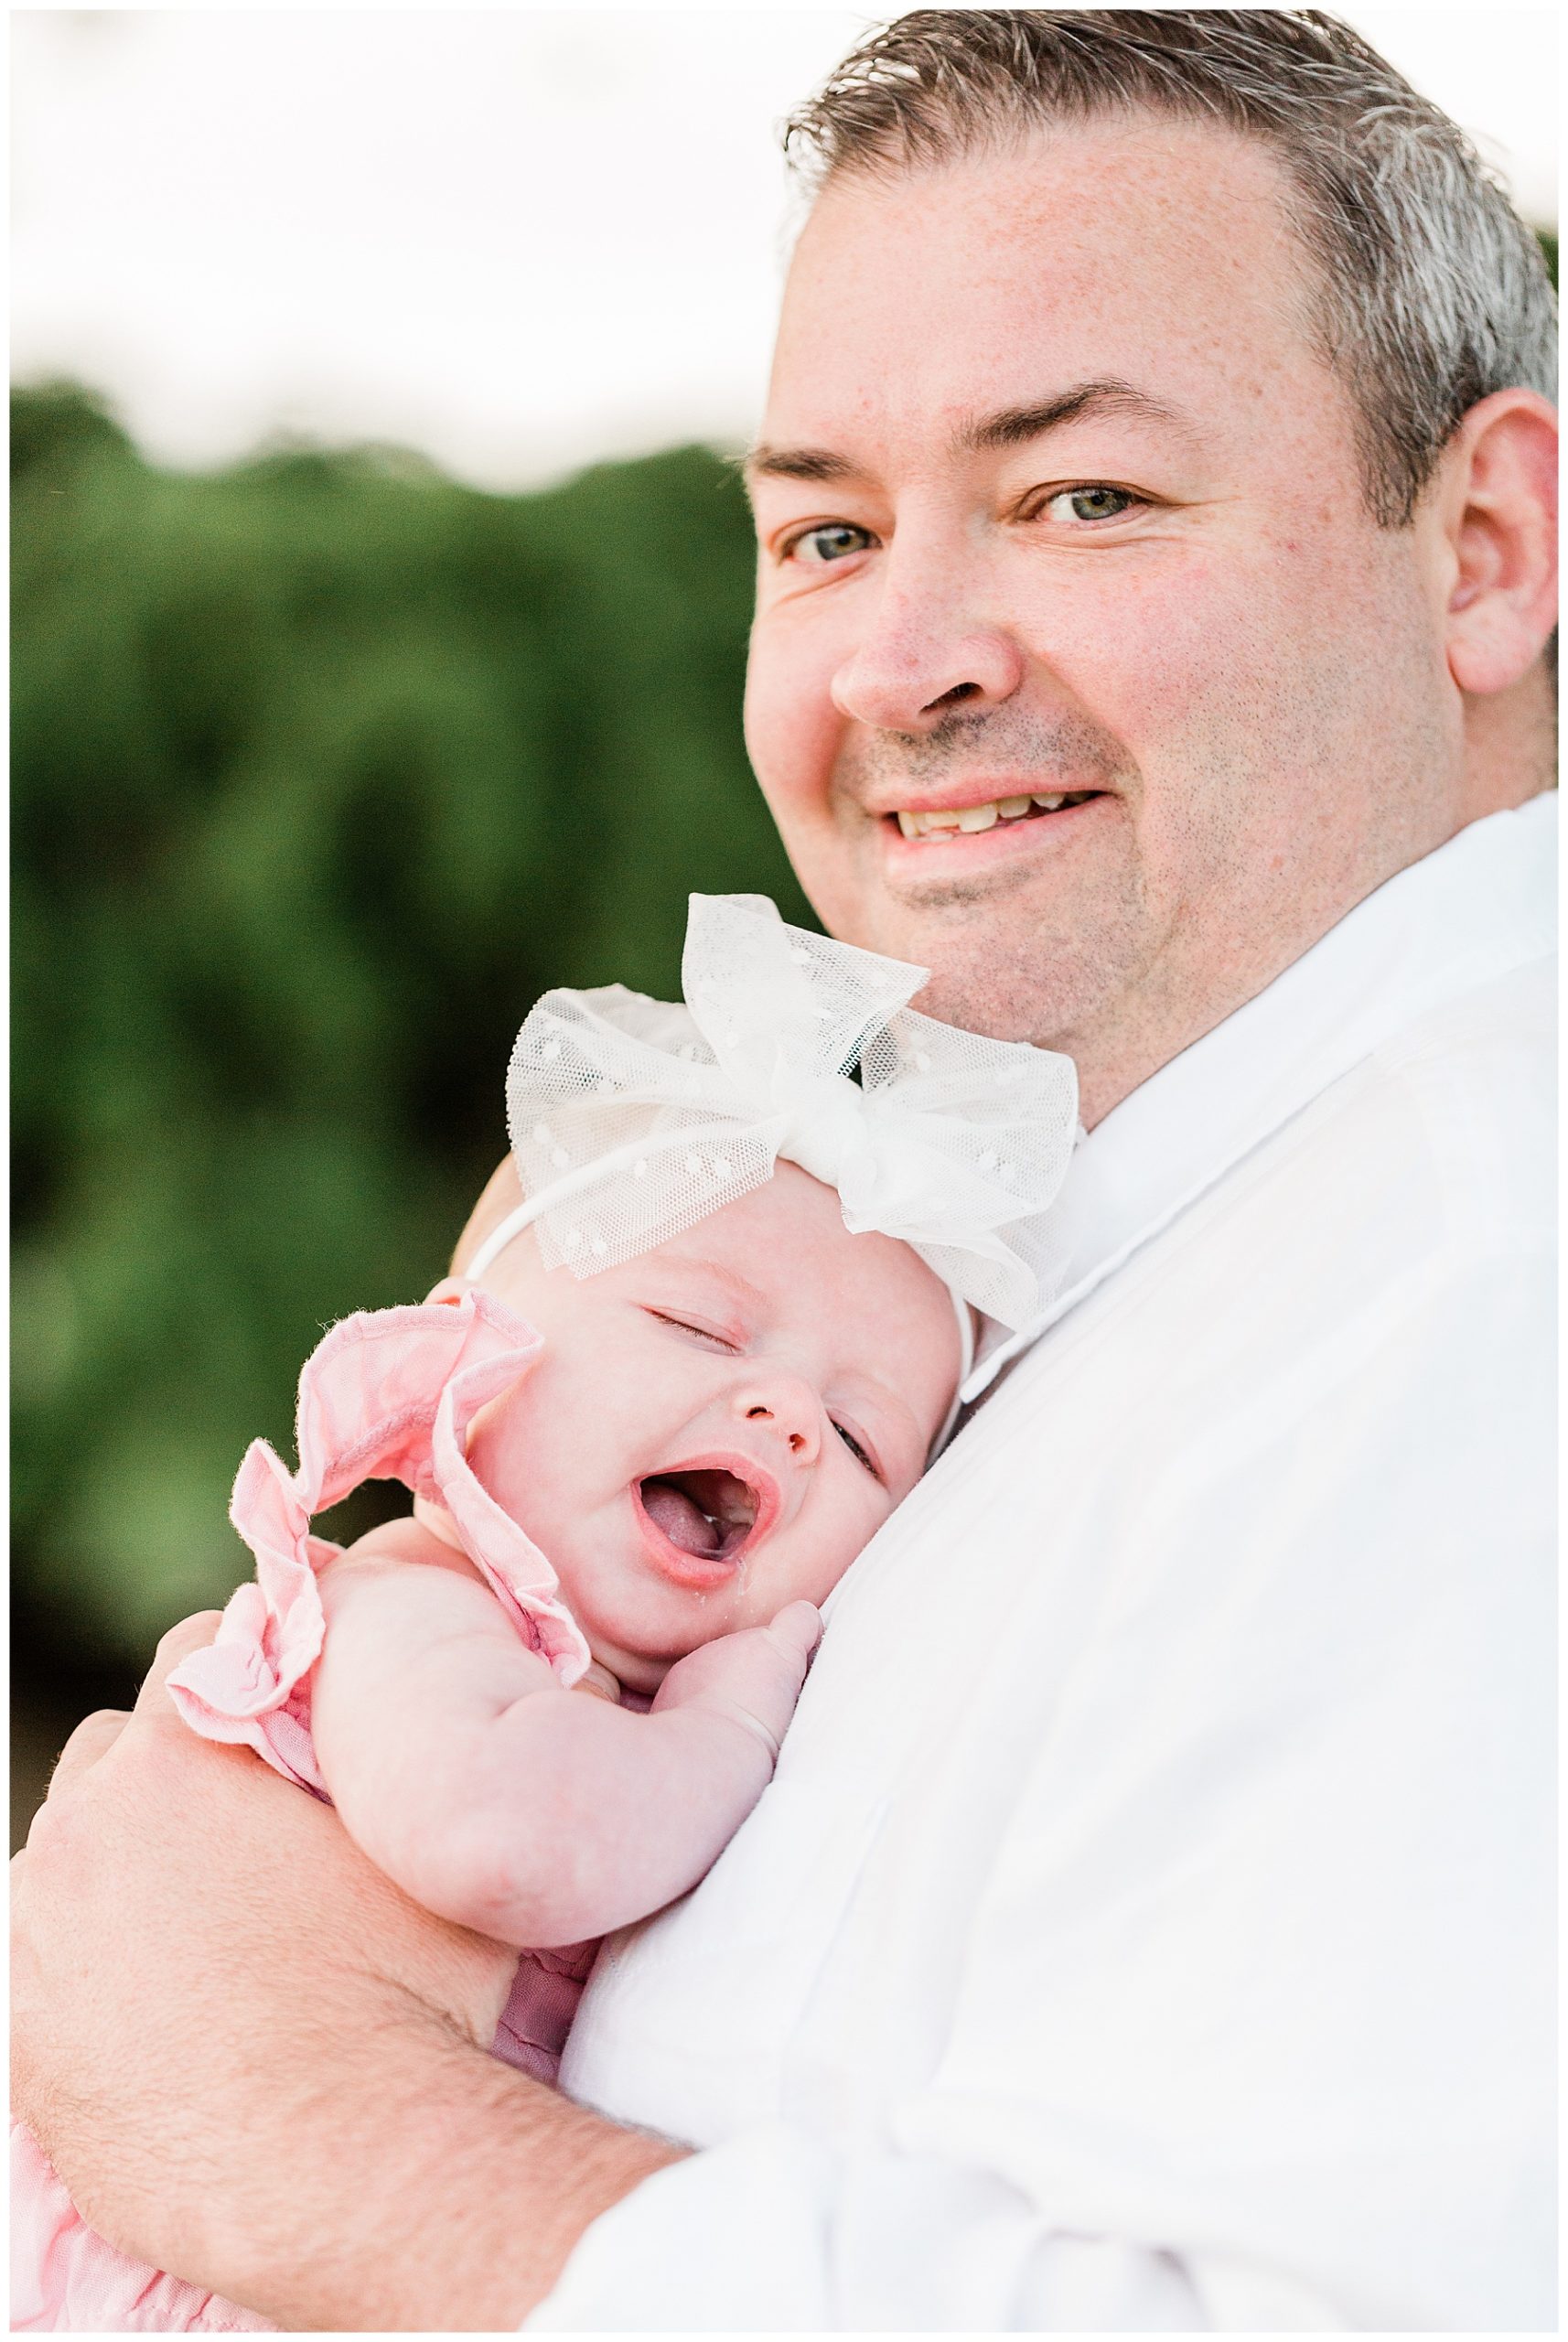 Baby-girl-with-her-father-Hudson-valley-lifestyle-photography